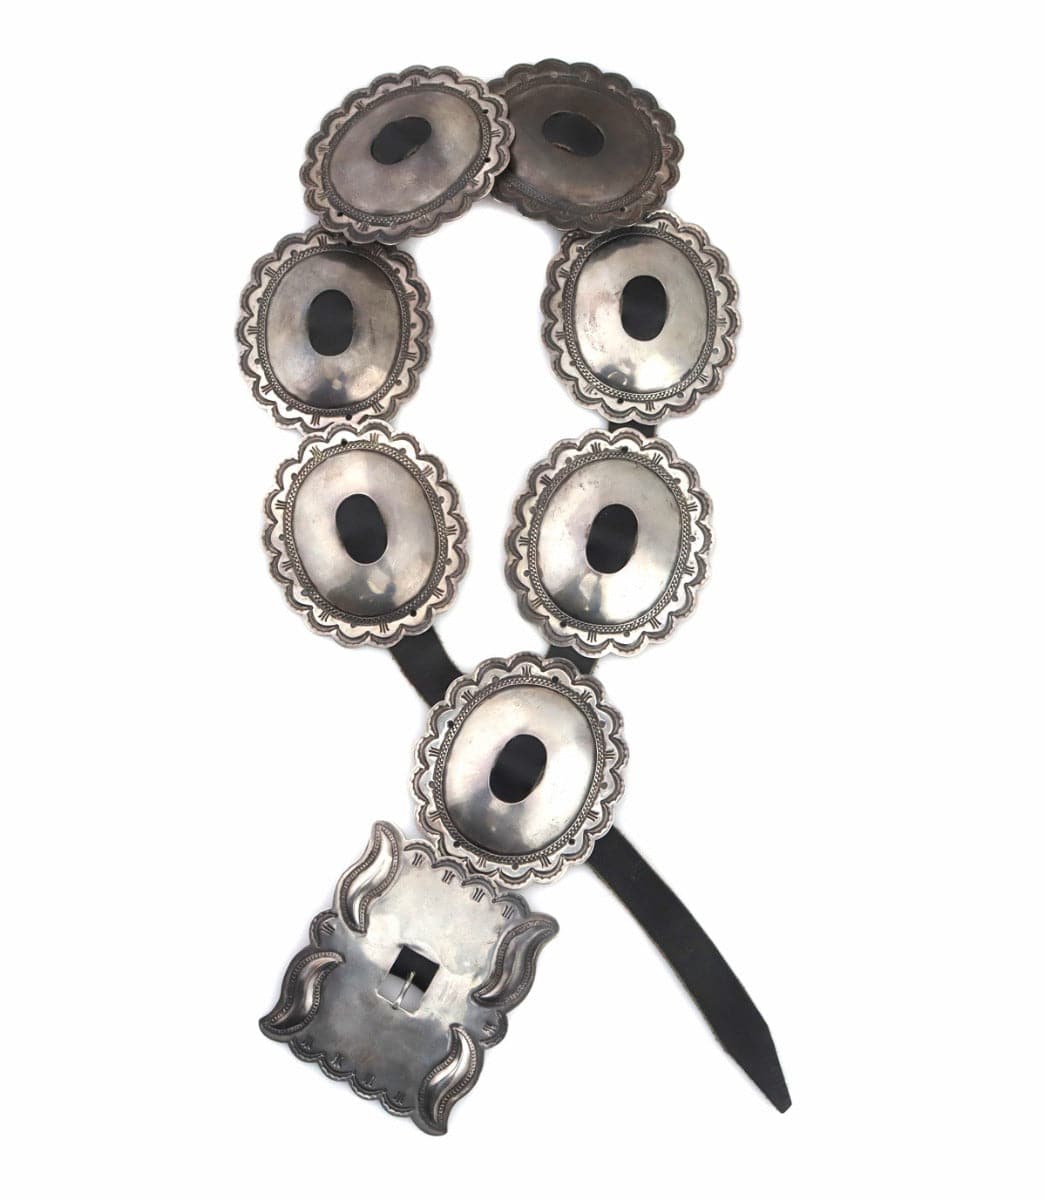 Attributed to Jonathan Platero - Navajo Silver and Leather Concho Belt c. 1950s, 29" to 34" waist (J14779)
